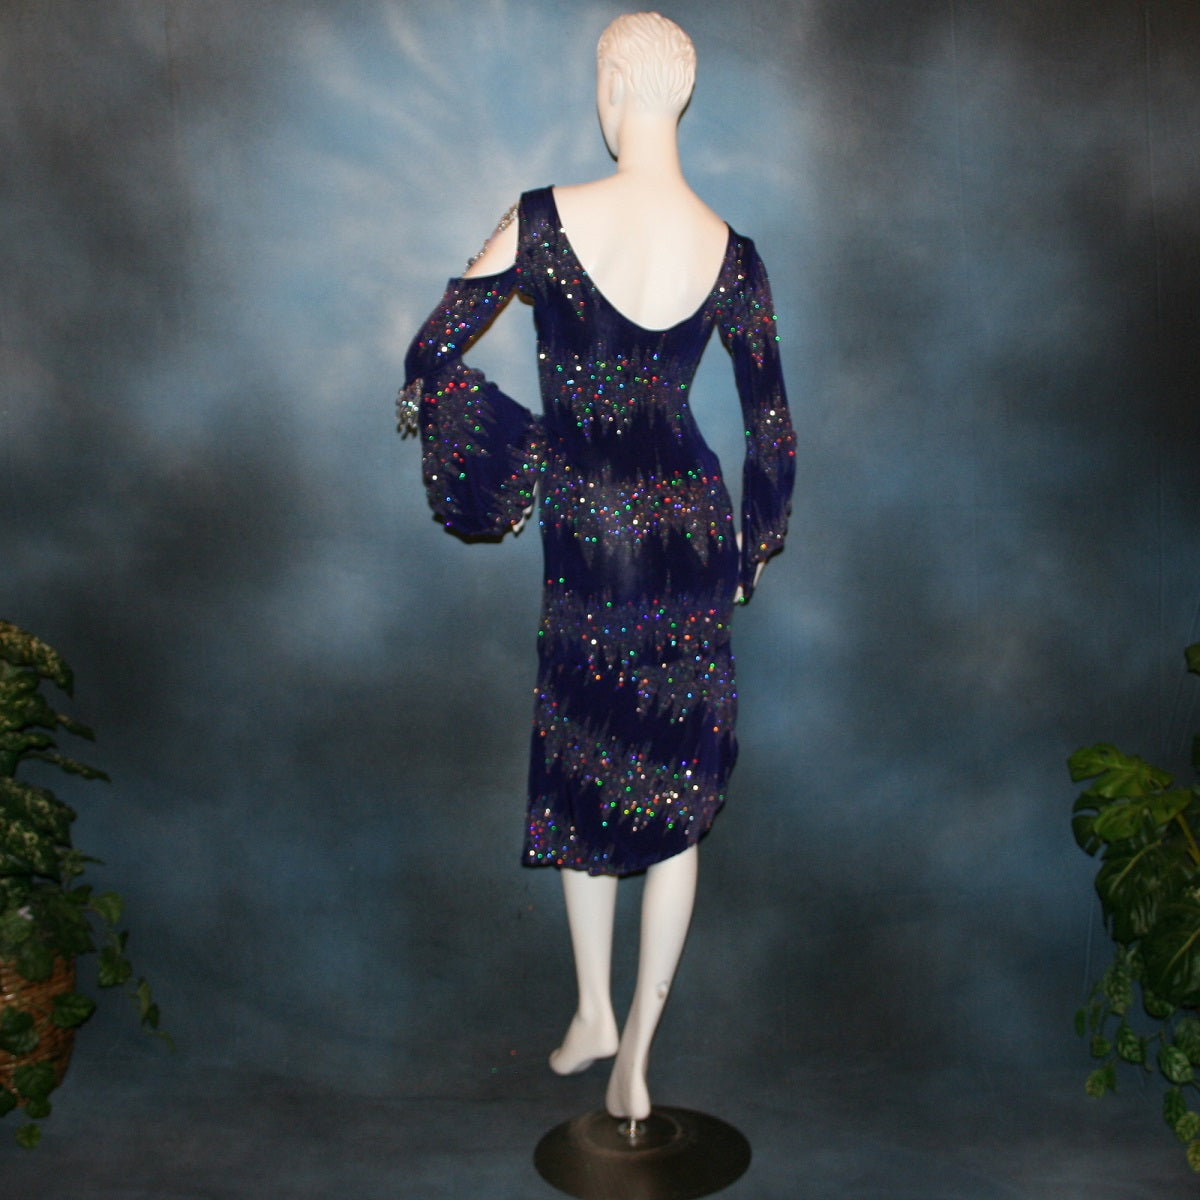 back view of Deep royal purple Latin/rhythm/tango dress created in deep royal purple glitter slinky with an awesome electrifying glitter pattern features one longe sleeve, with flair at the bottom, & another very interesting cold shoulder detailed one with hand beading & a flaired flounce.